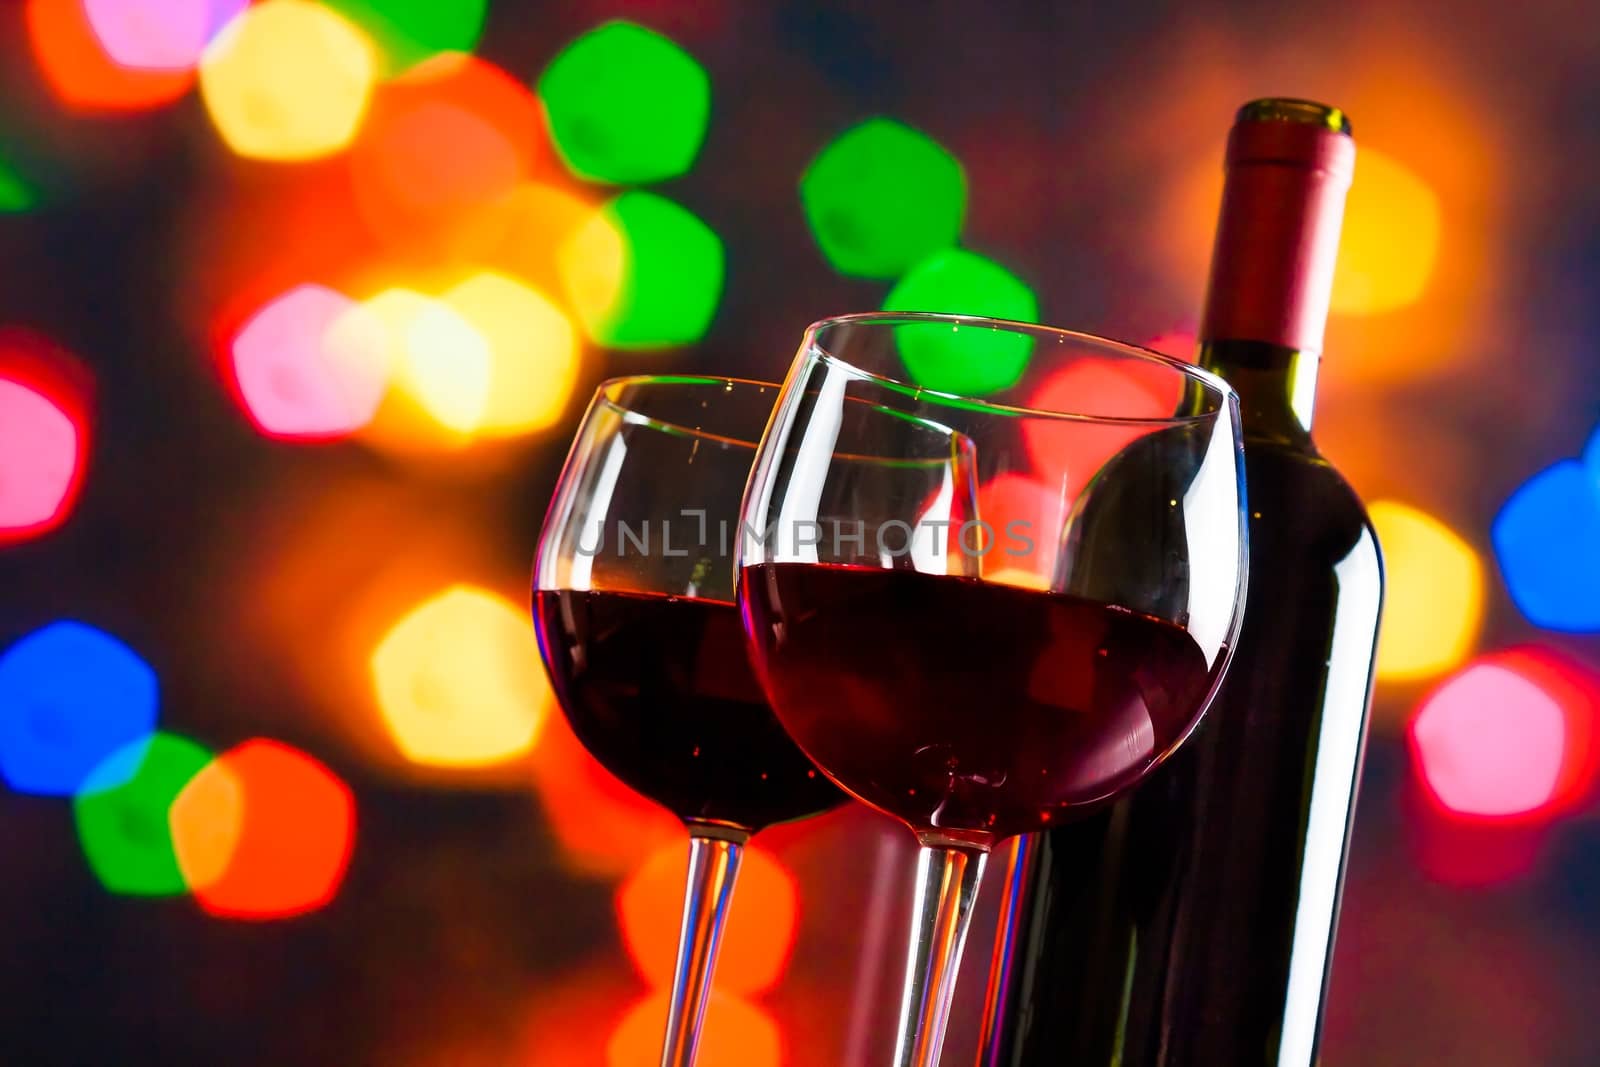 two red wine glasses near bottle against colorful bokeh lights background, festive and fun concept